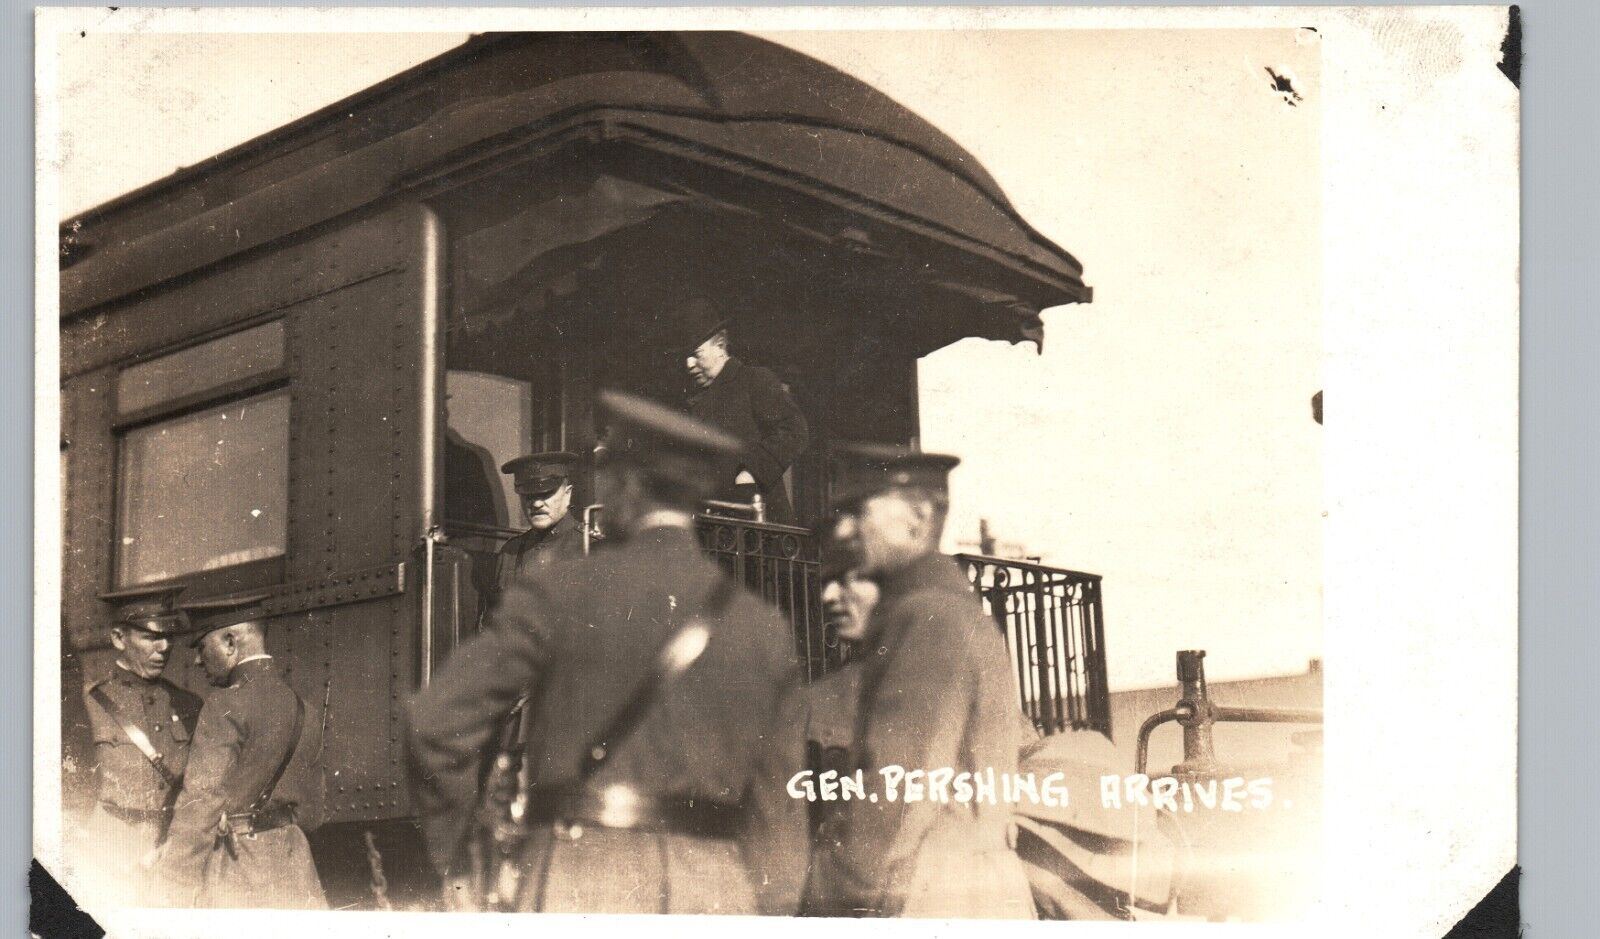 GENERAL PERSHING ARRIVES ON TRAIN fort sill ok real photo postcard rppc oklahoma